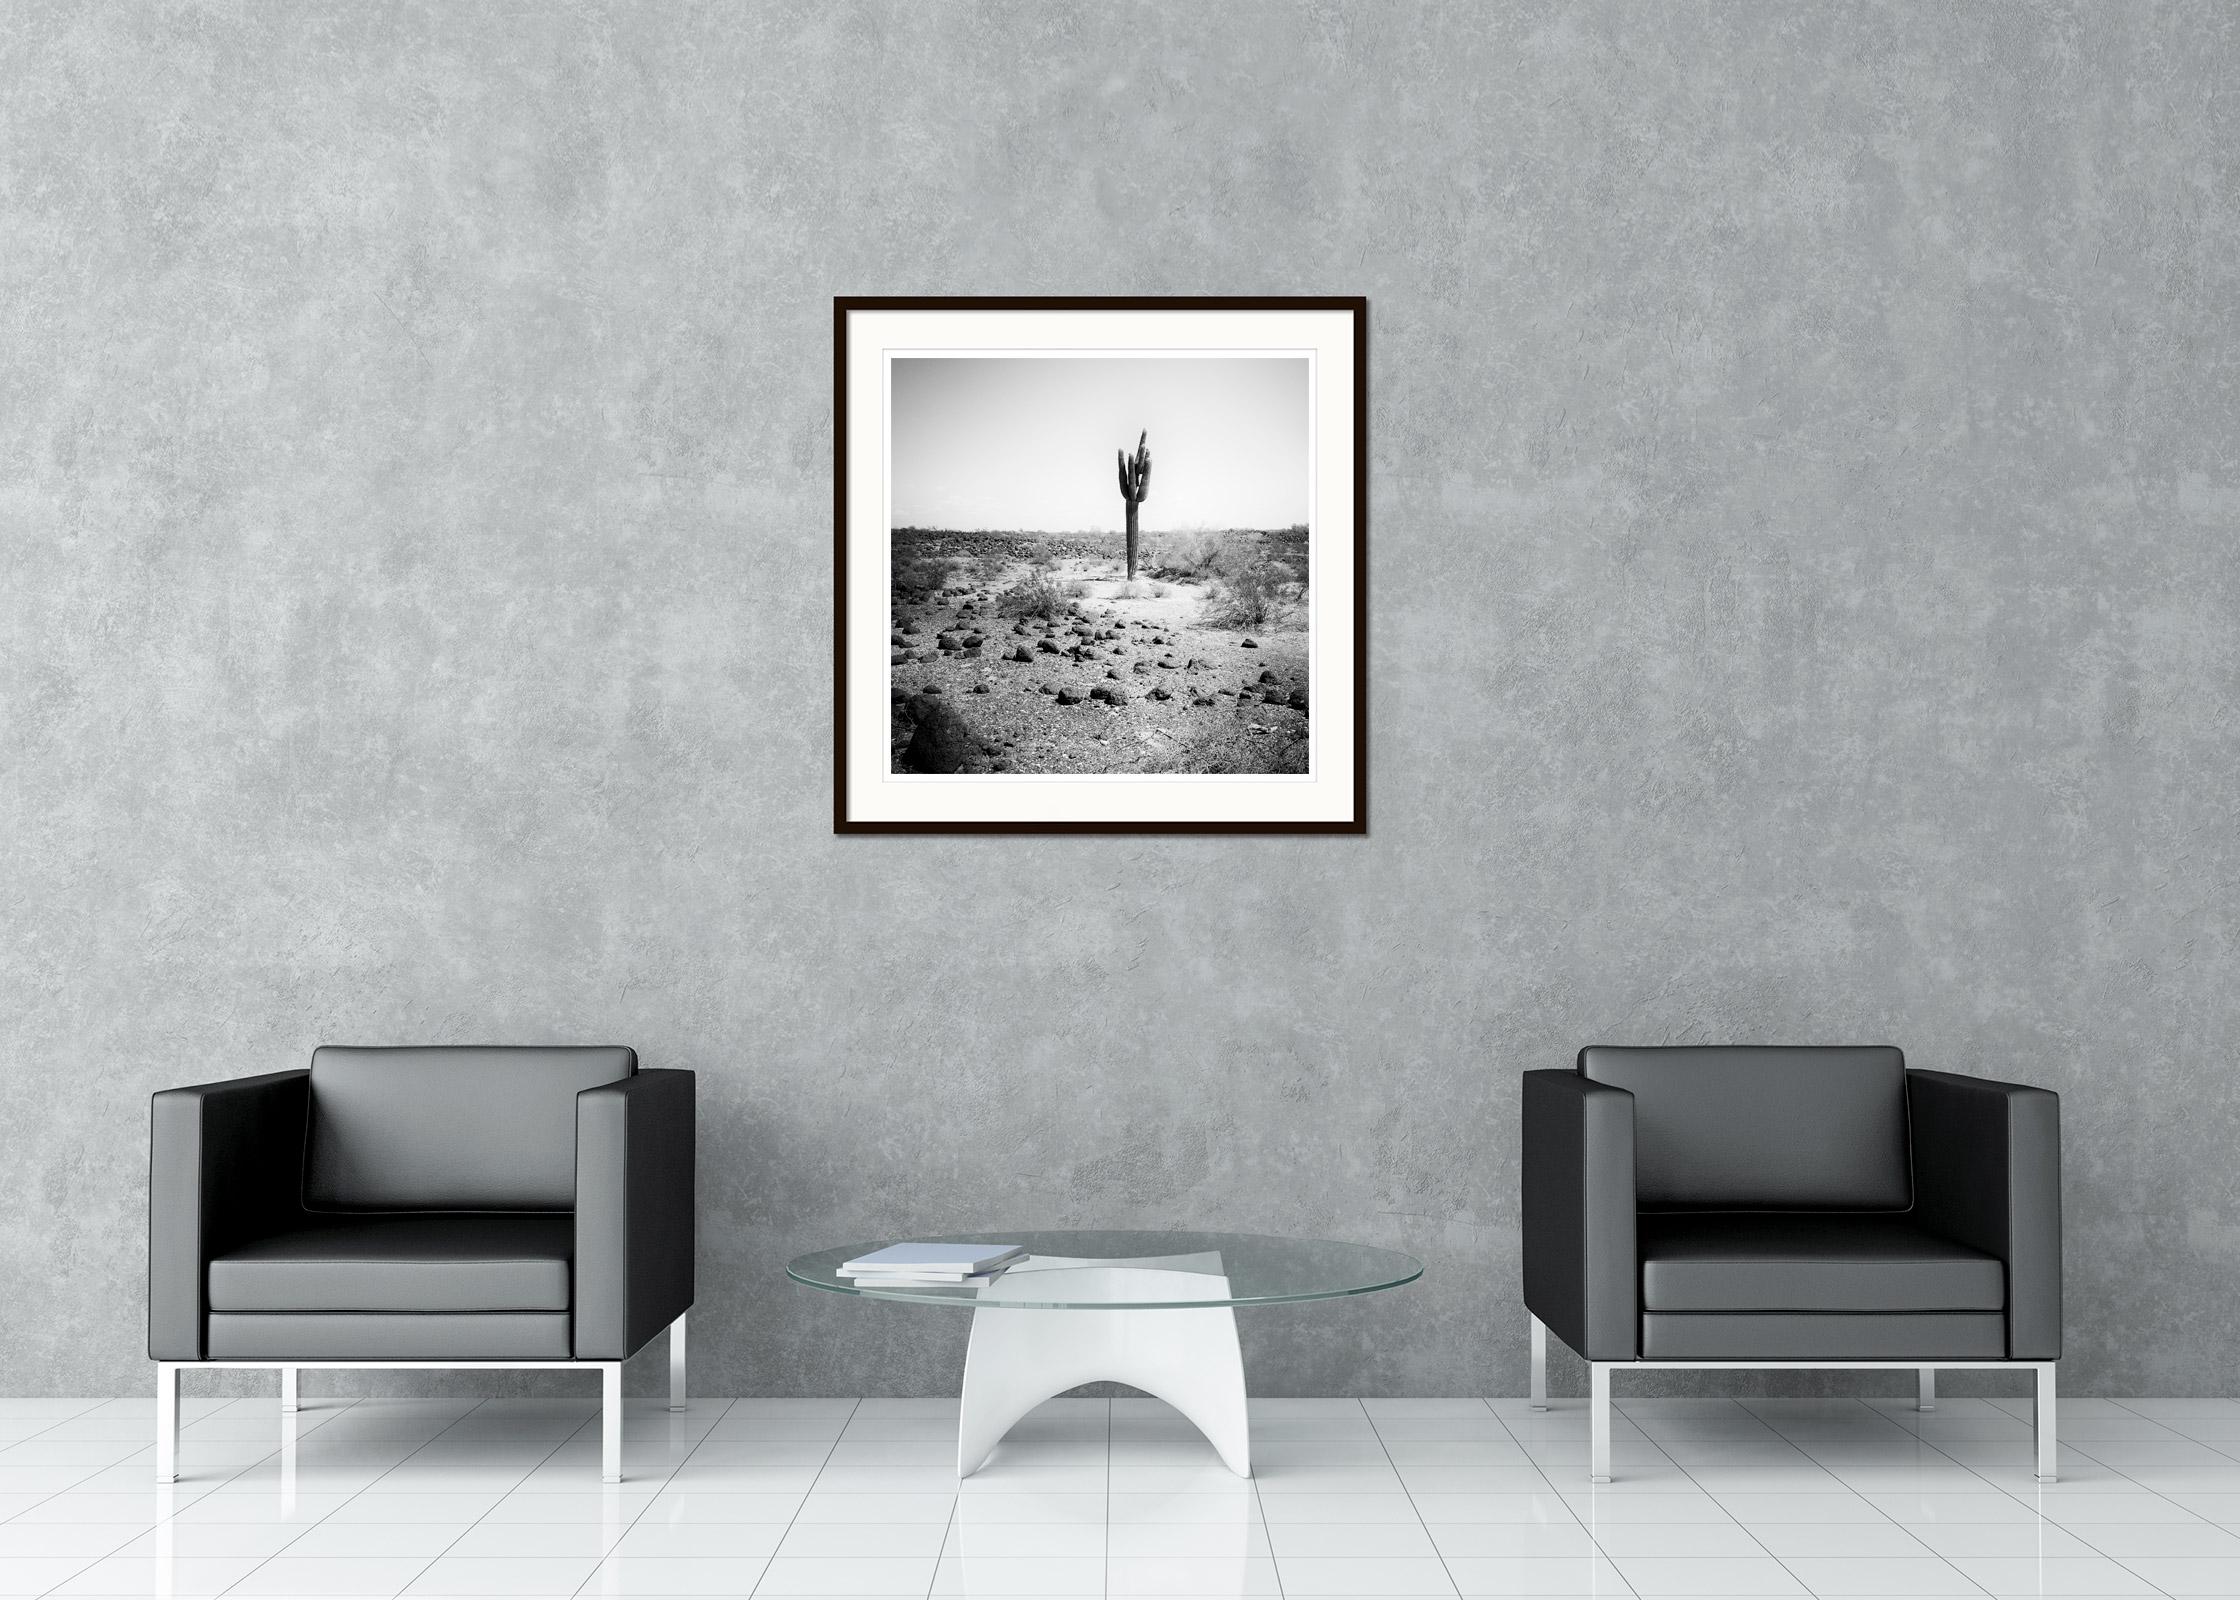 Black and White Fine Art Landscape Photography. Single cactus in the stone desert in Aziona, USA. Archival pigment ink print, edition of 9. Signed, titled, dated and numbered by artist. Certificate of authenticity included. Printed with 4cm white